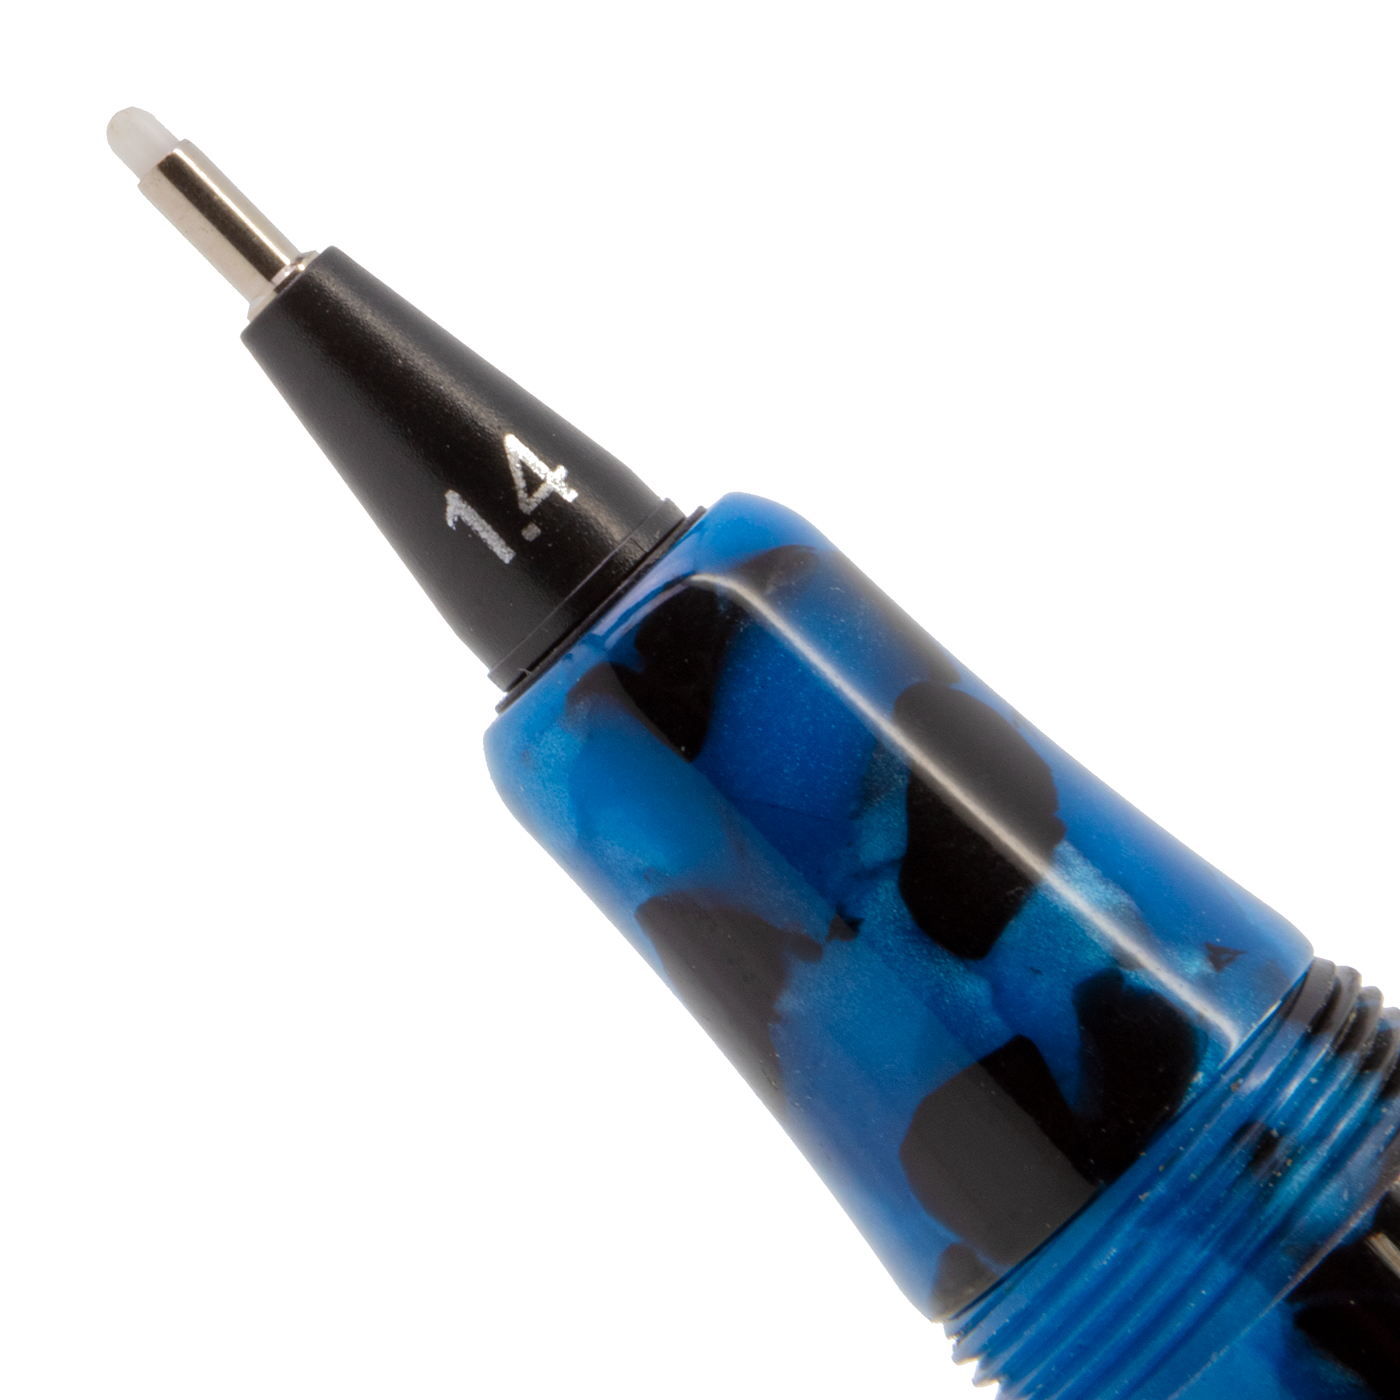 Yookers Front Section for Gaia Fiber Pen Blue/Black Marble Resin